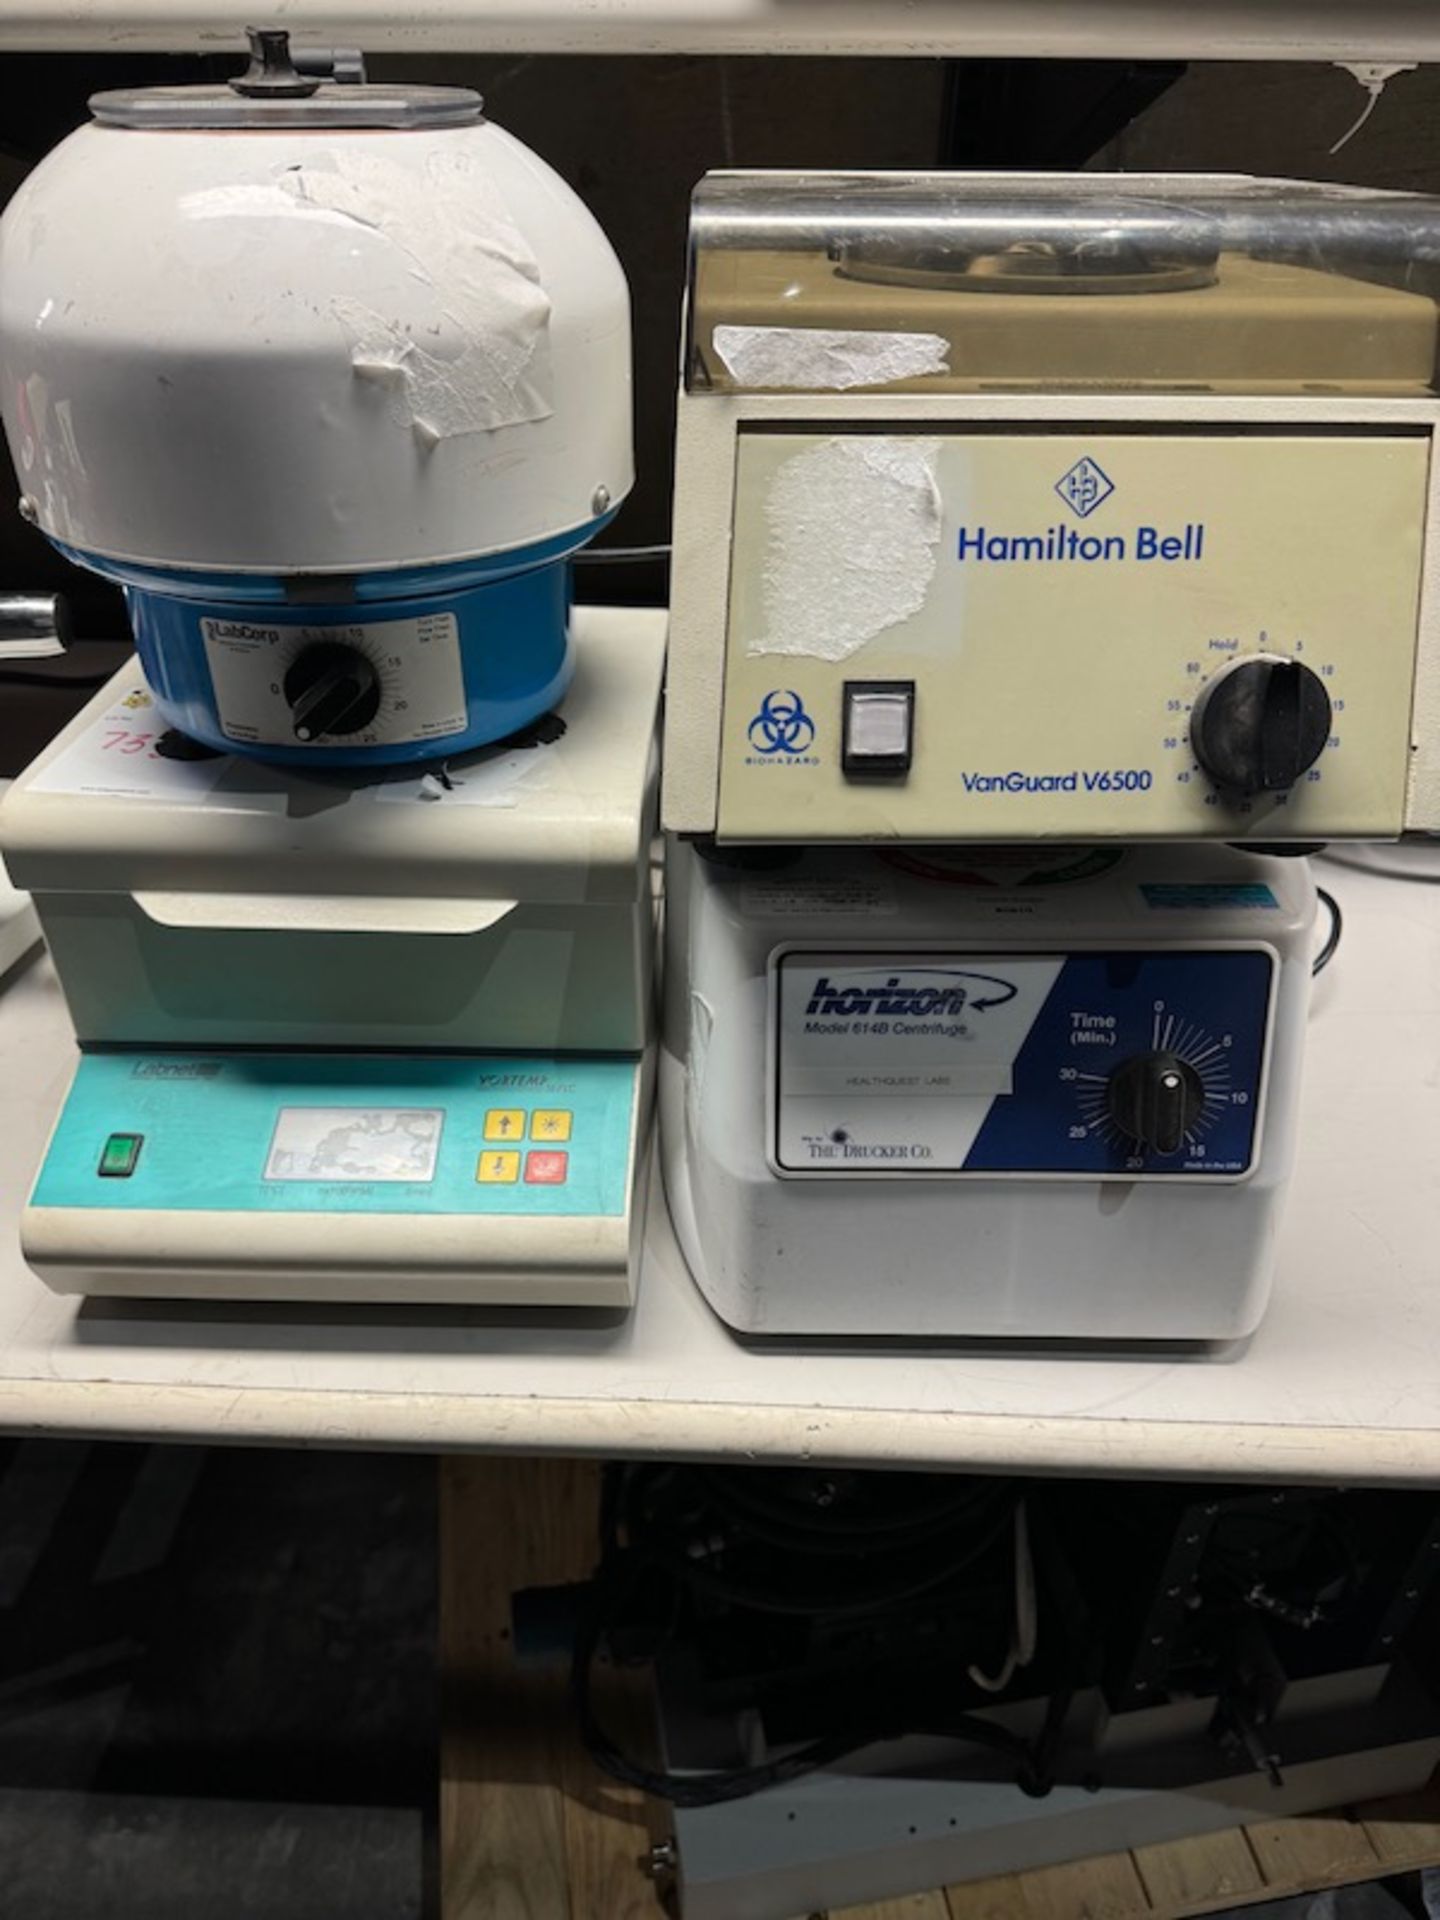 LOT: QTY-4 EPPENDORF CENTRIFUGES CONSISTING OF QTY-2 EPPENDORF 5417 C & QTY-1 5415 C - Image 7 of 10